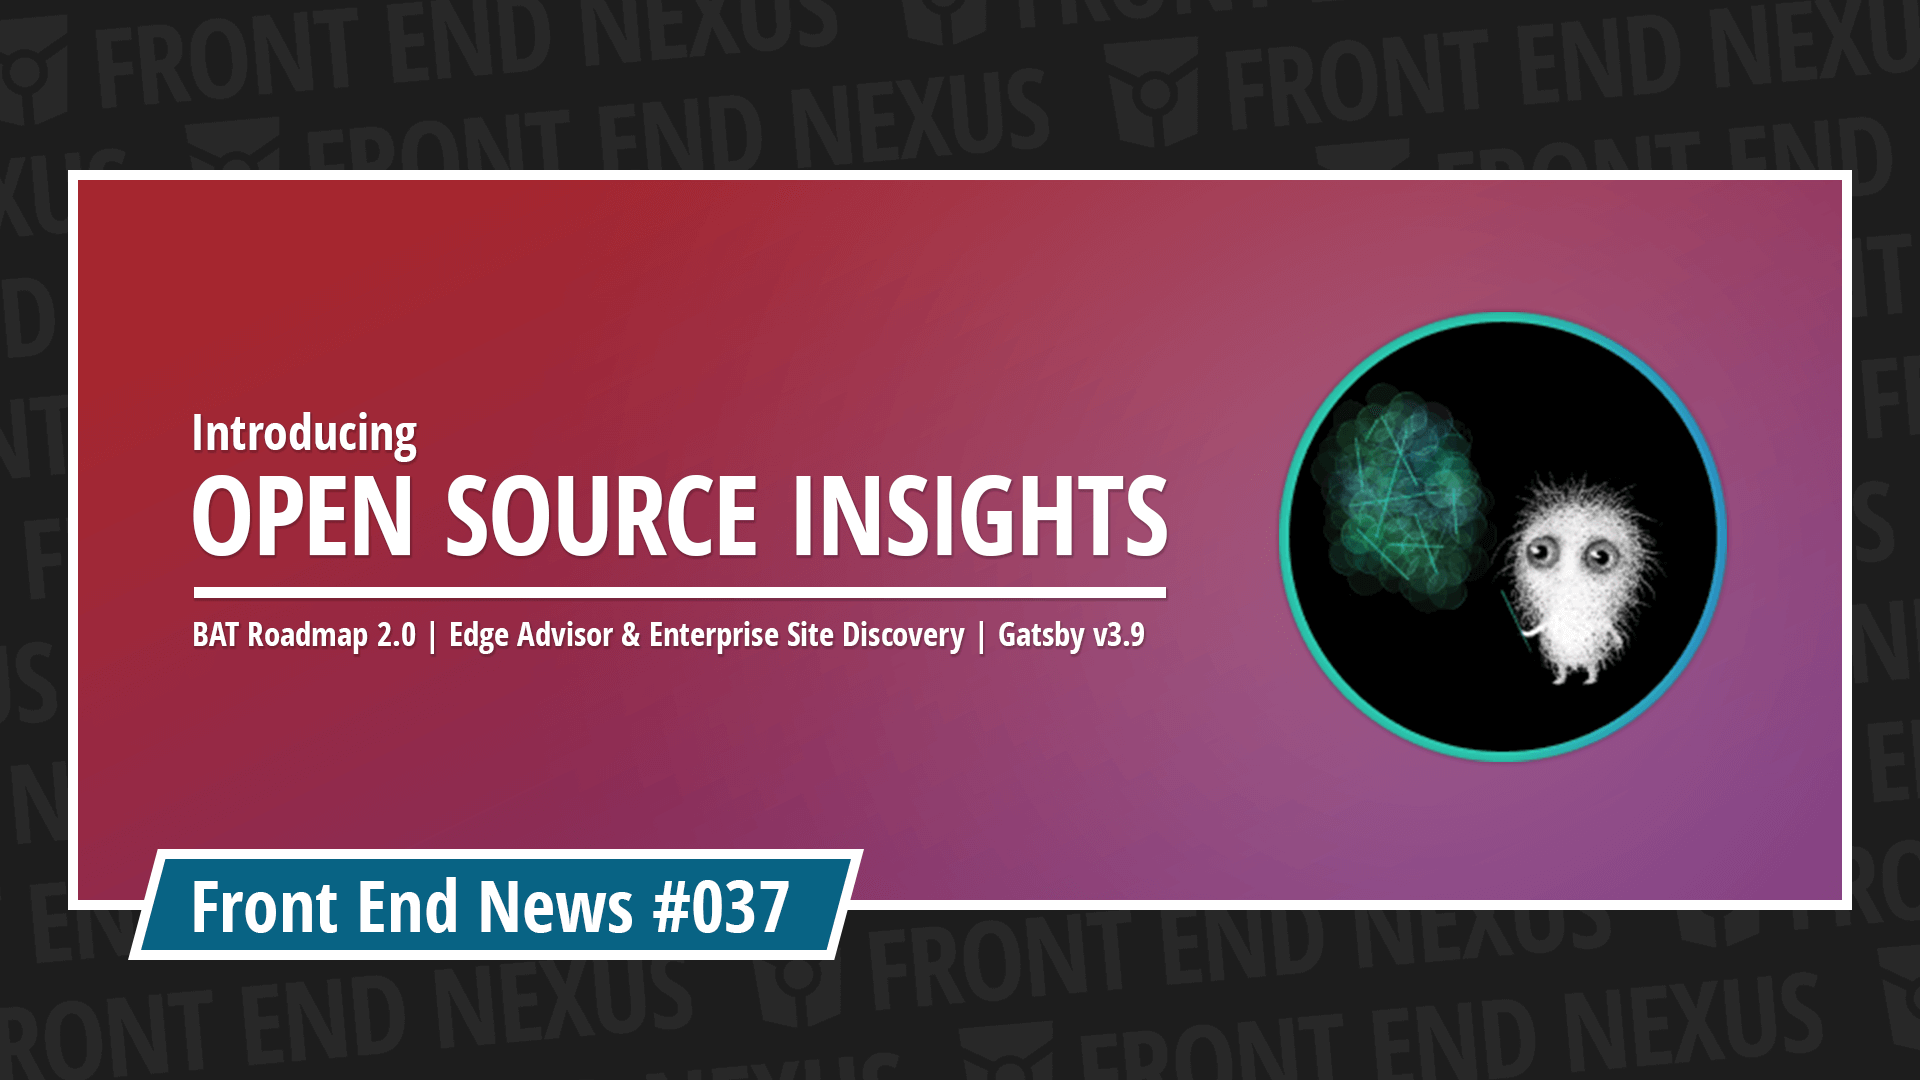 Open Source Insights, BAT Roadmap 2.0 Update 2, Tools for migration to Microsoft Edge, and Gatsby v3.9 | Front End News #037